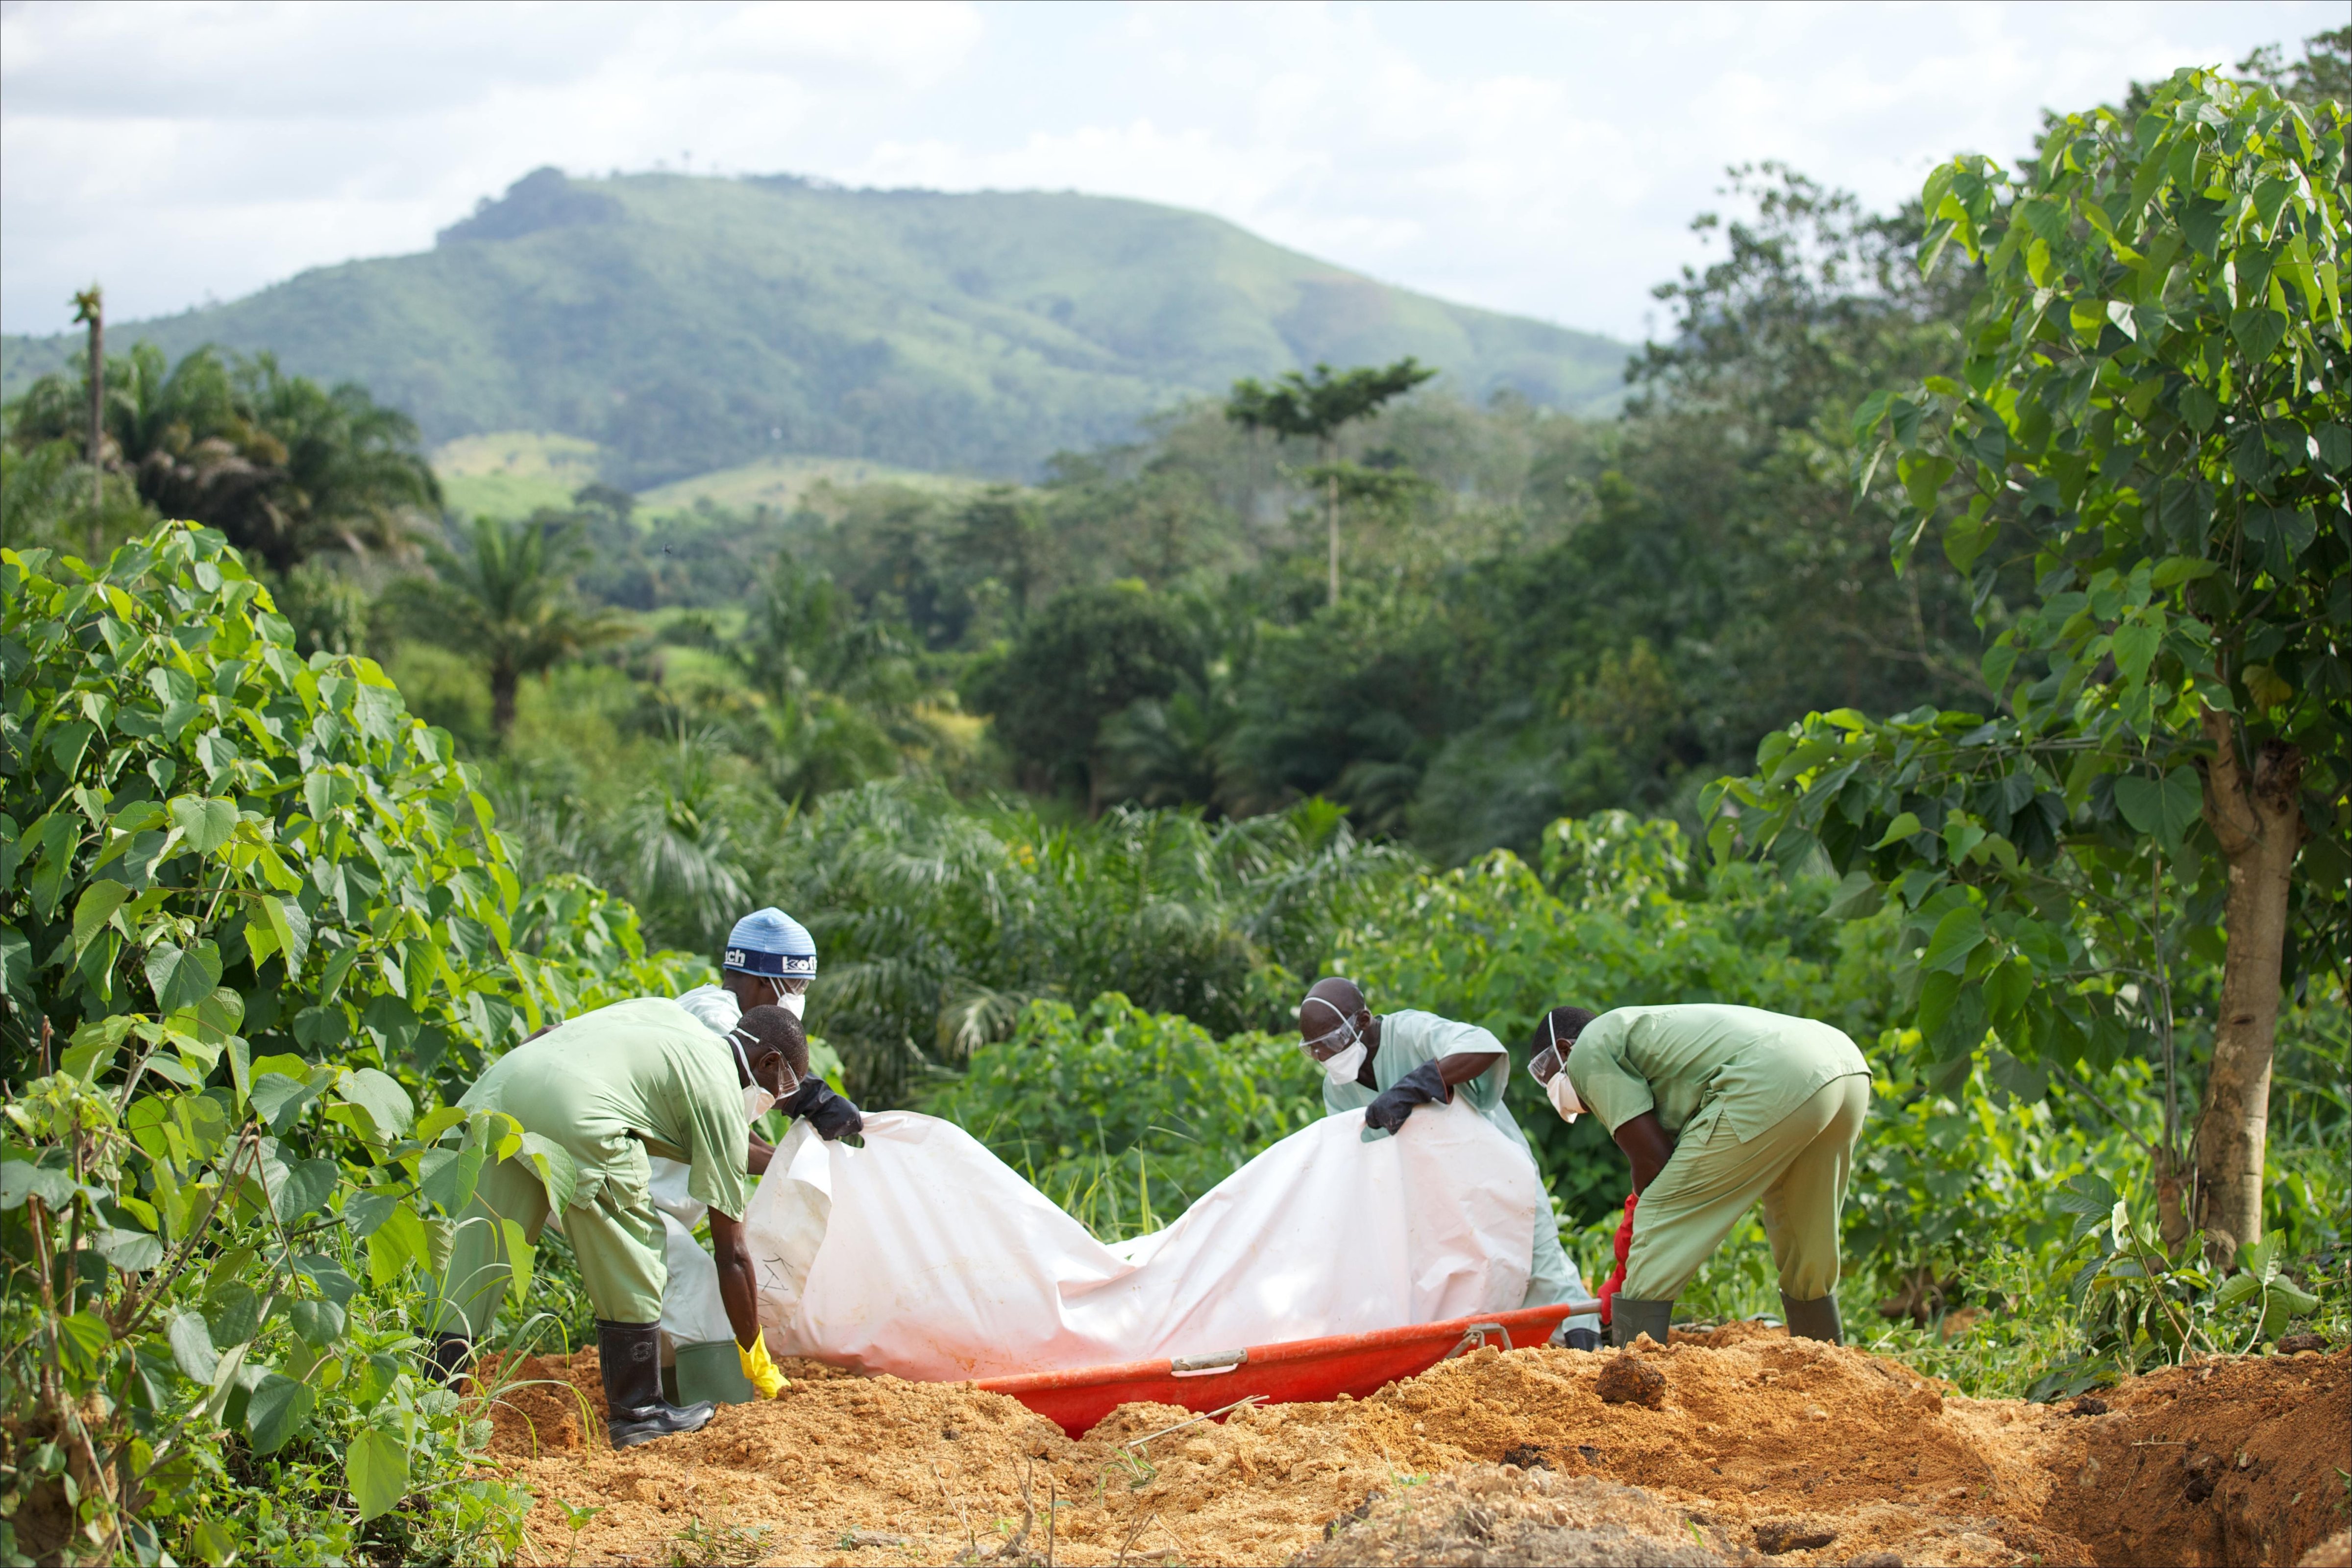 Red cross members from Guinea place an Ebola-infected body into a grave in a cemetery now overwhelmed with fresh graves in Gueckedou, Guinea on Oct. 17, 2014. (Kristin Palitza—DPA /LANDOV)